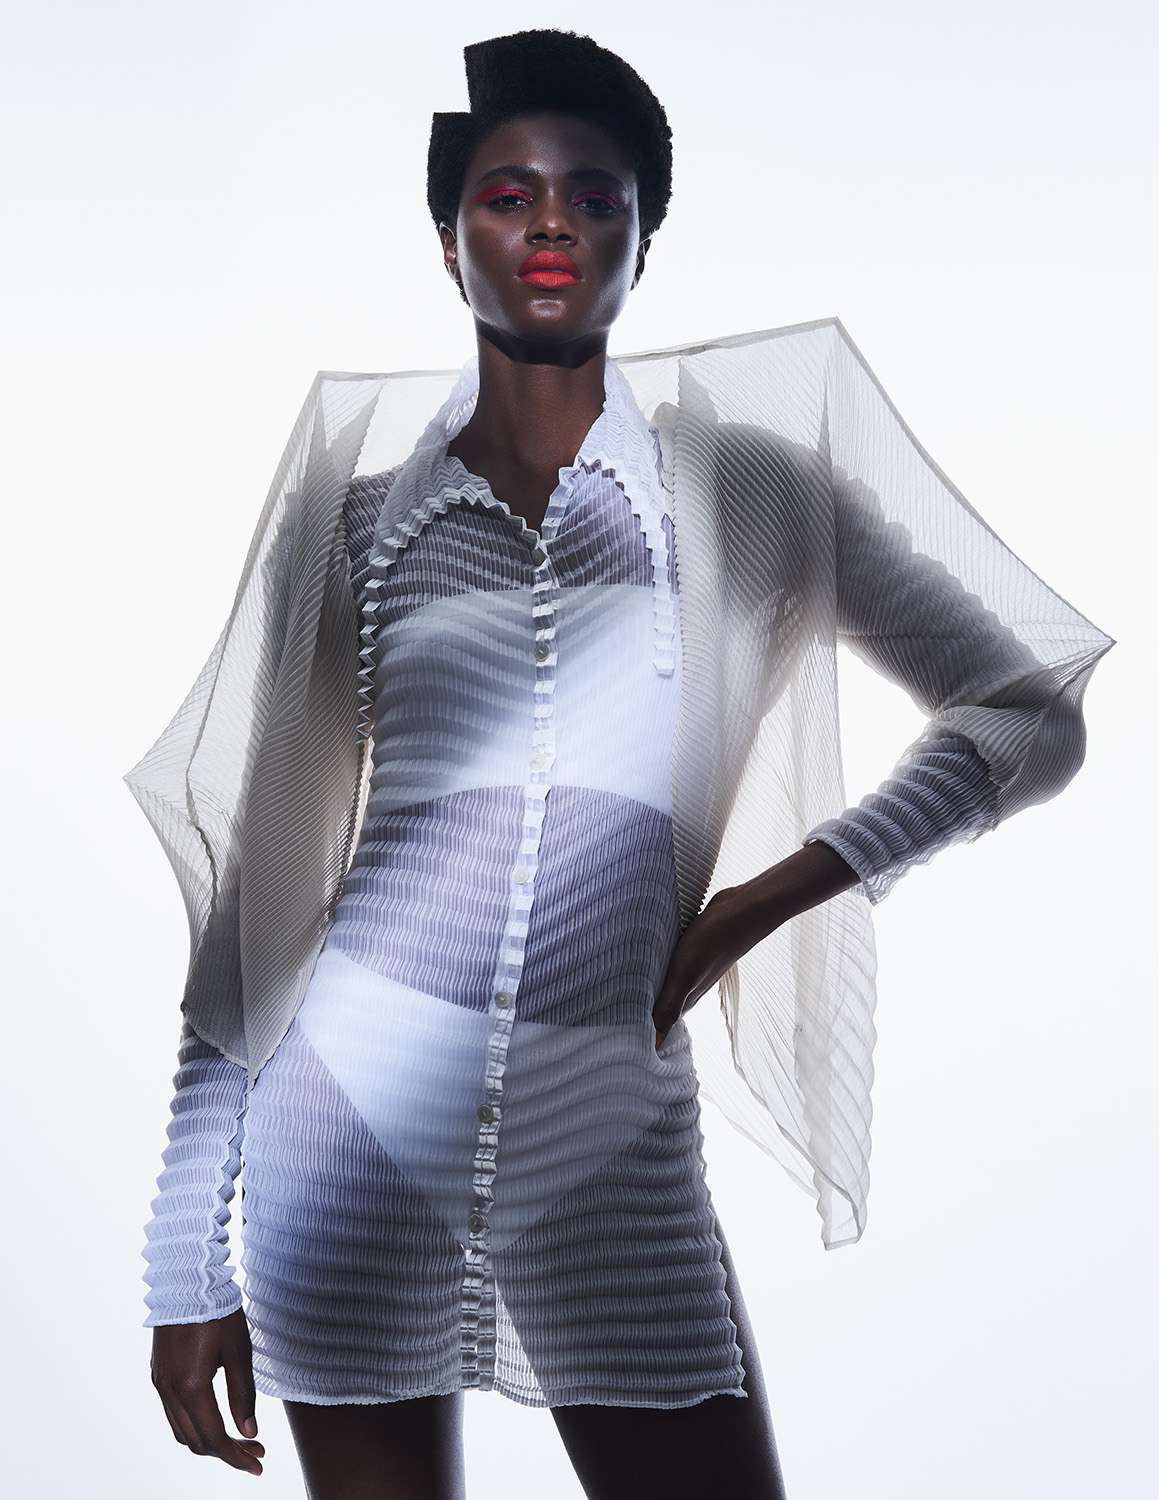 Issey Miyake Archive Colleciton by Mark Edio on Previiew